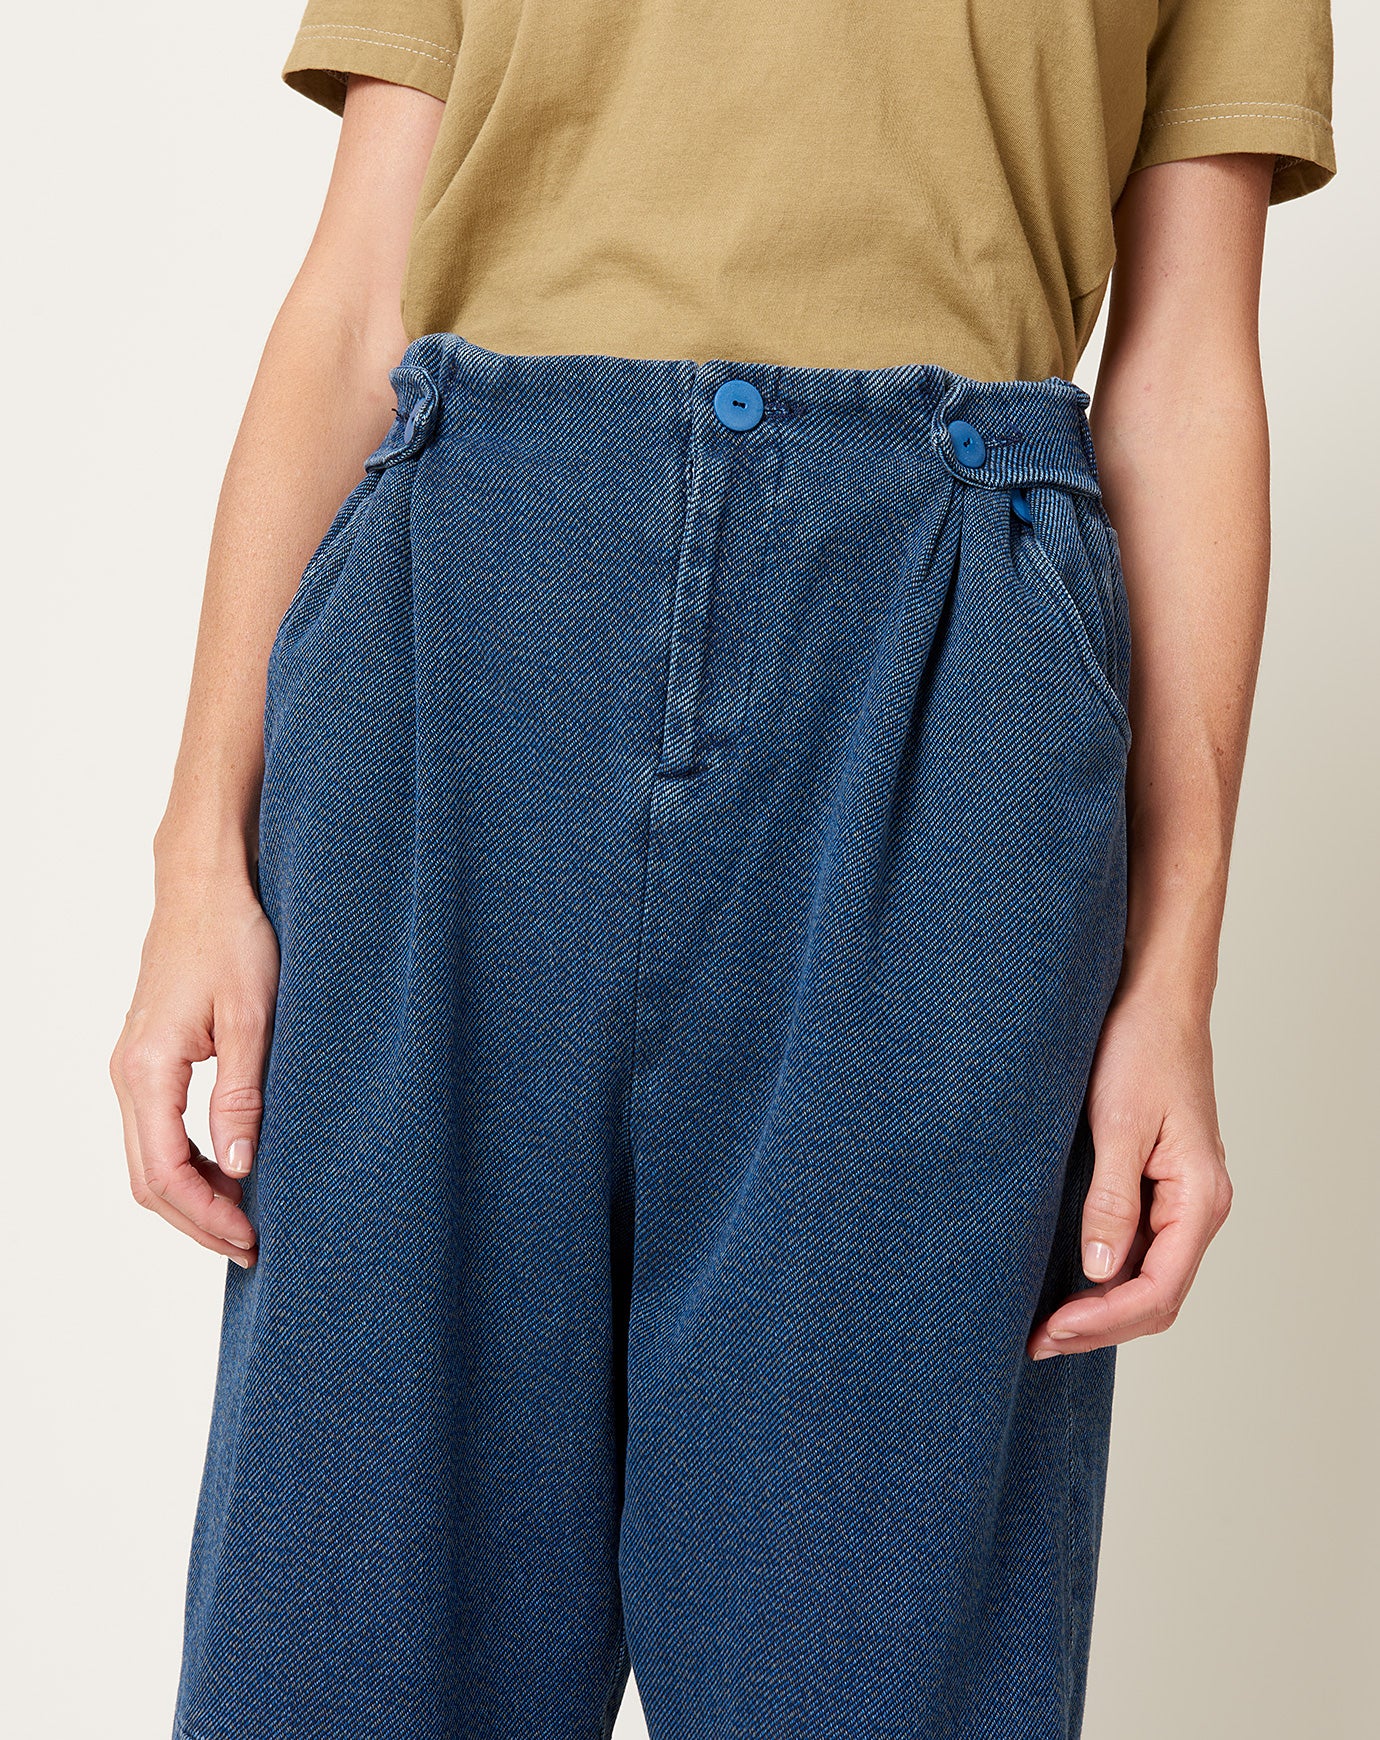 Anntian One Pleat Pant in Garment Washed Indigo